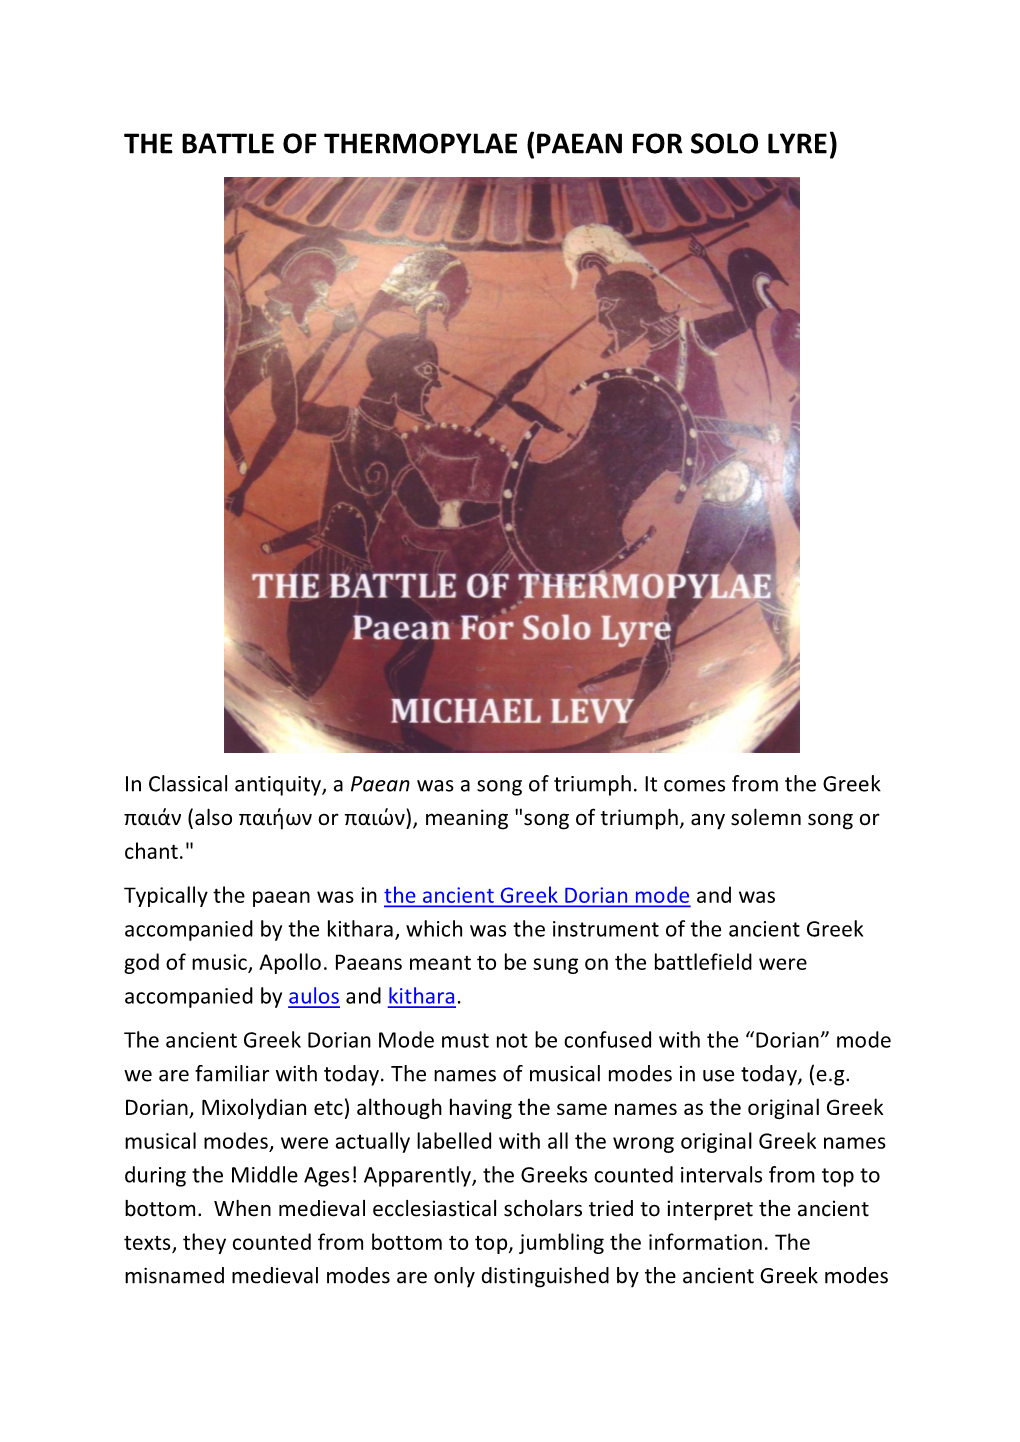 The Battle of Thermopylae (Paean for Solo Lyre)